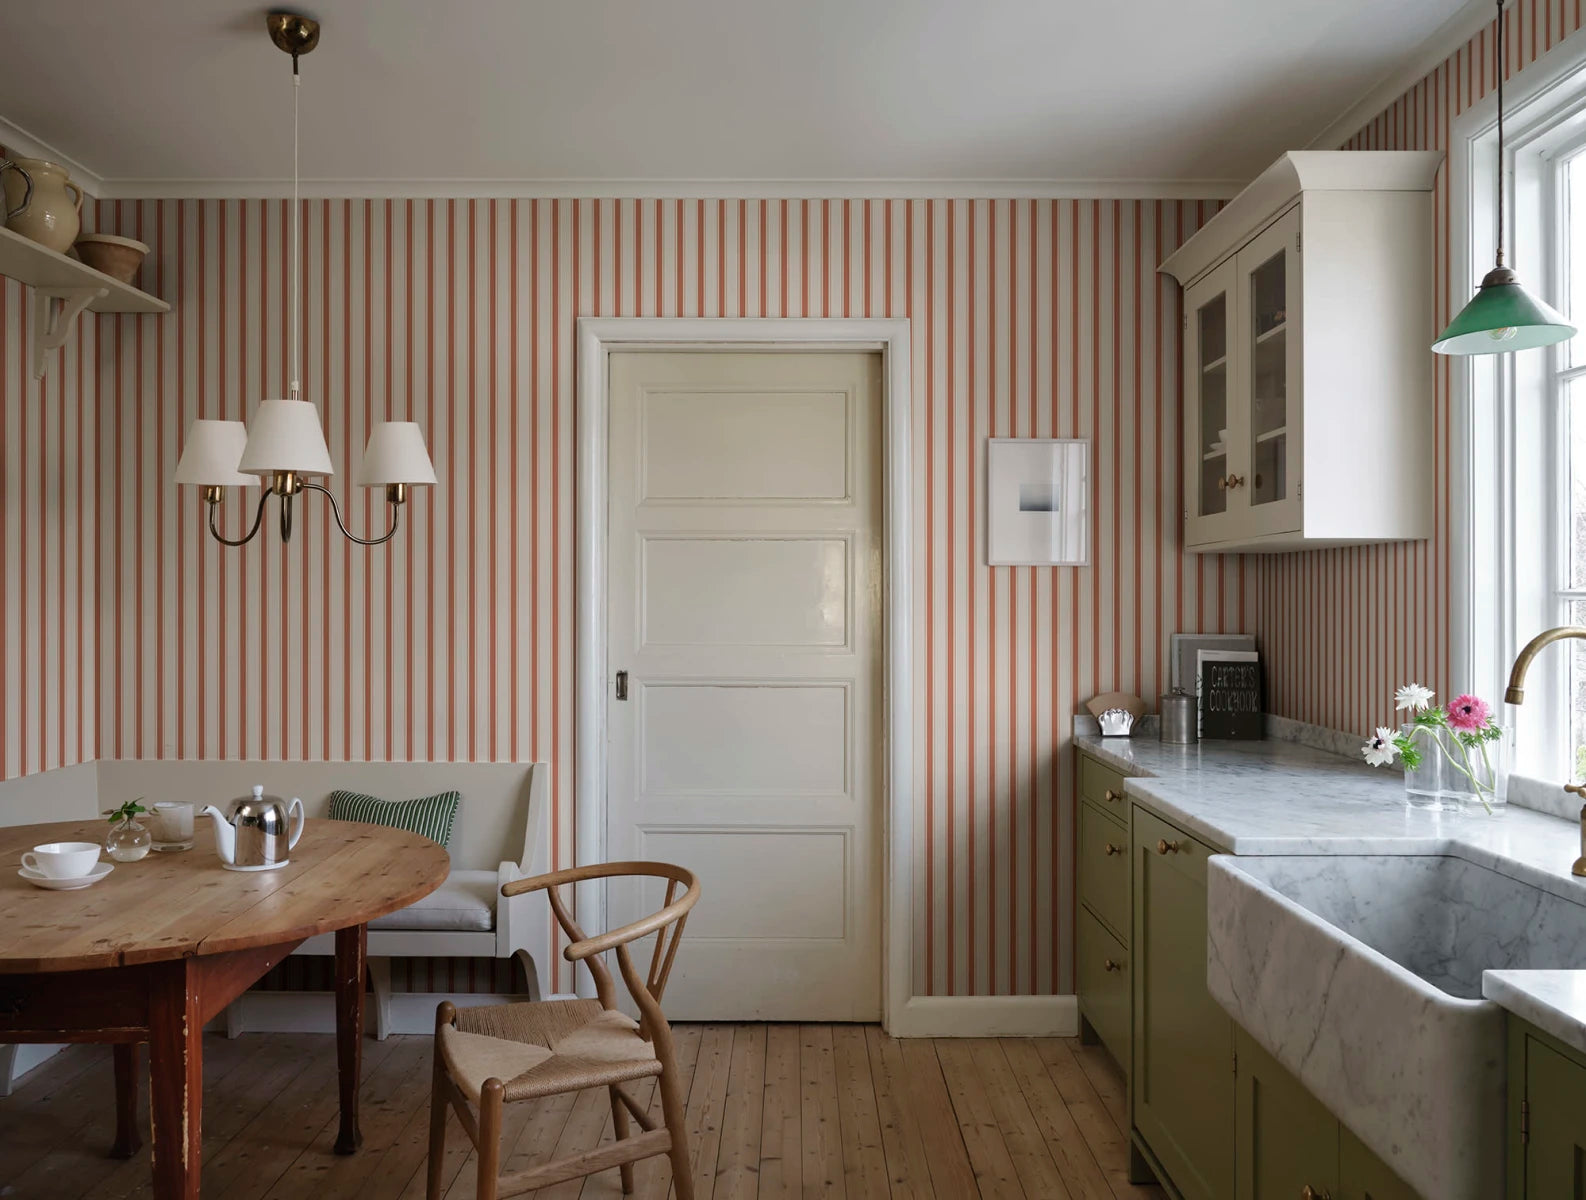 Our classic narrow striped wallpaper with small elegant gold dots is inspired by the beautiful silk draperies and furniture fabrics of the 18th century. 